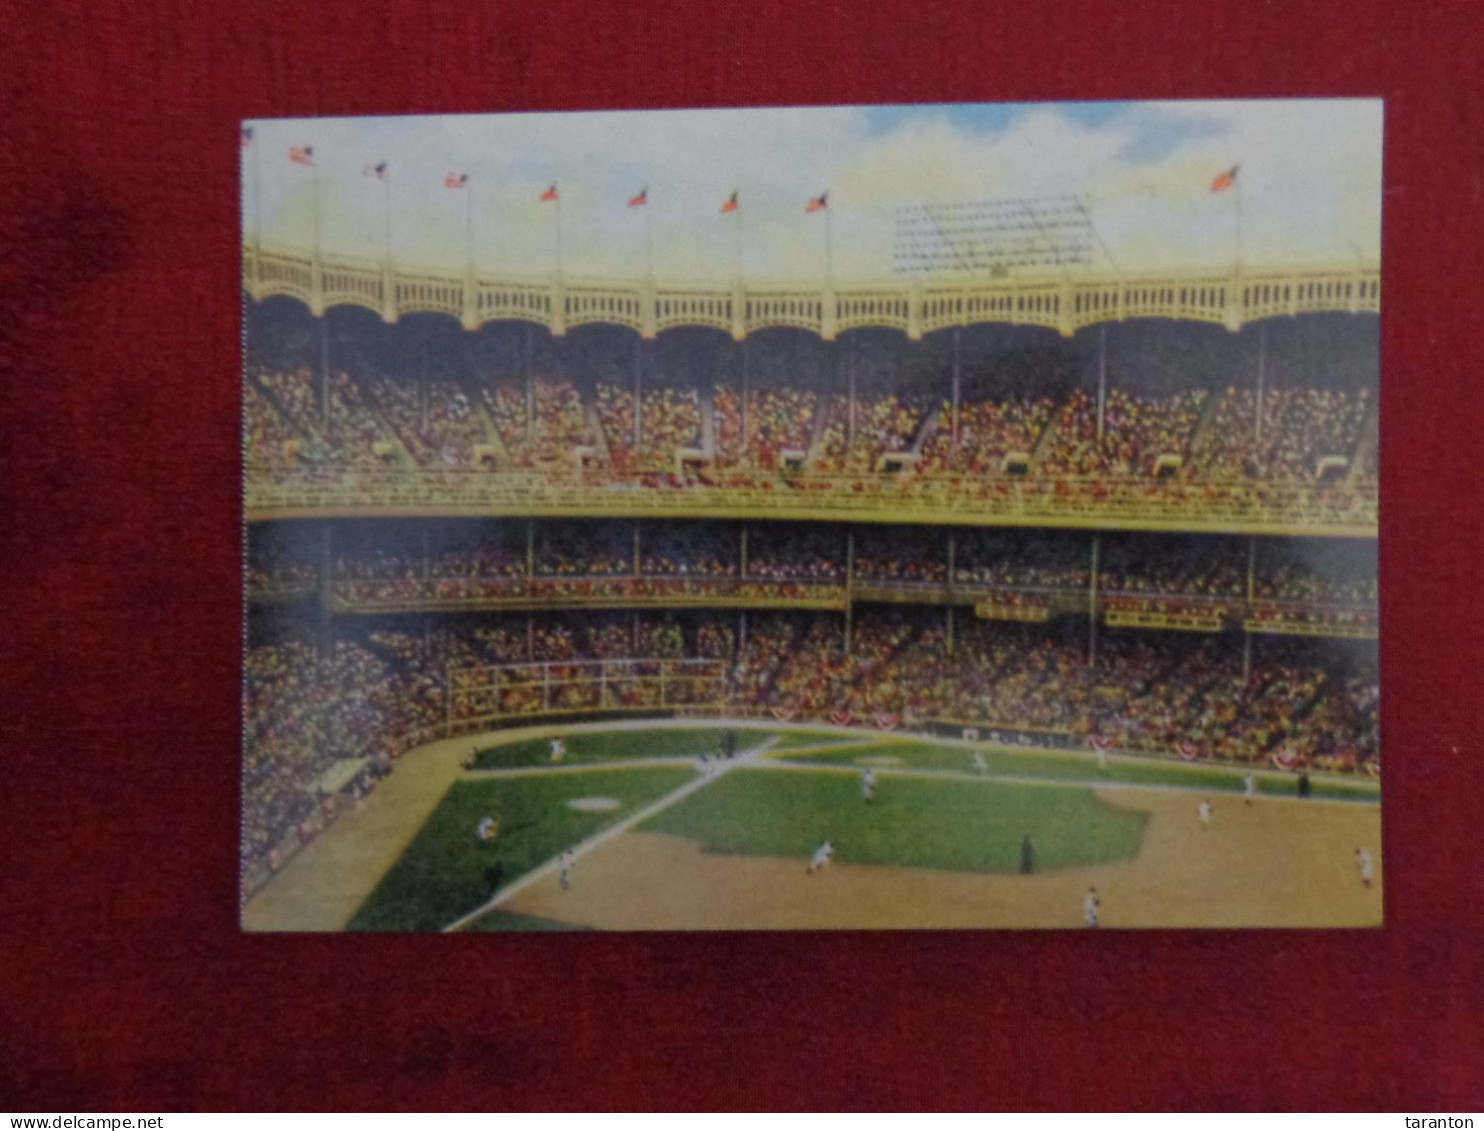 2001 - FDC/POST CARD - U.S.A., BASEBALL, YANKEE STADIUM, NEW YORK CITY - Collections (without Album)